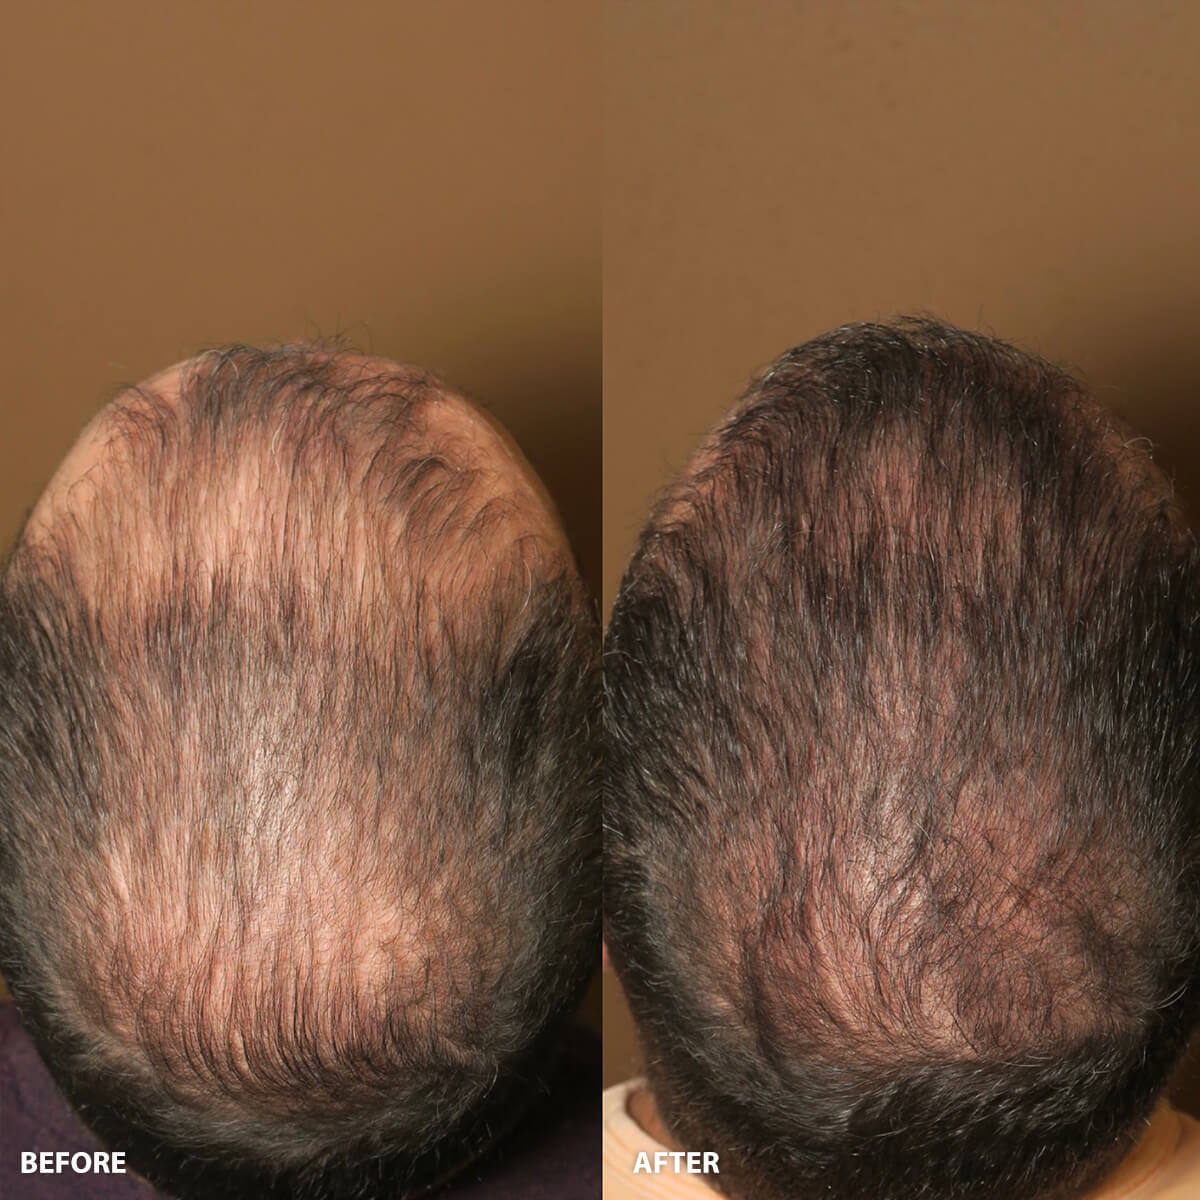 ARTAS Hair Transplantation - Before and After Pictures